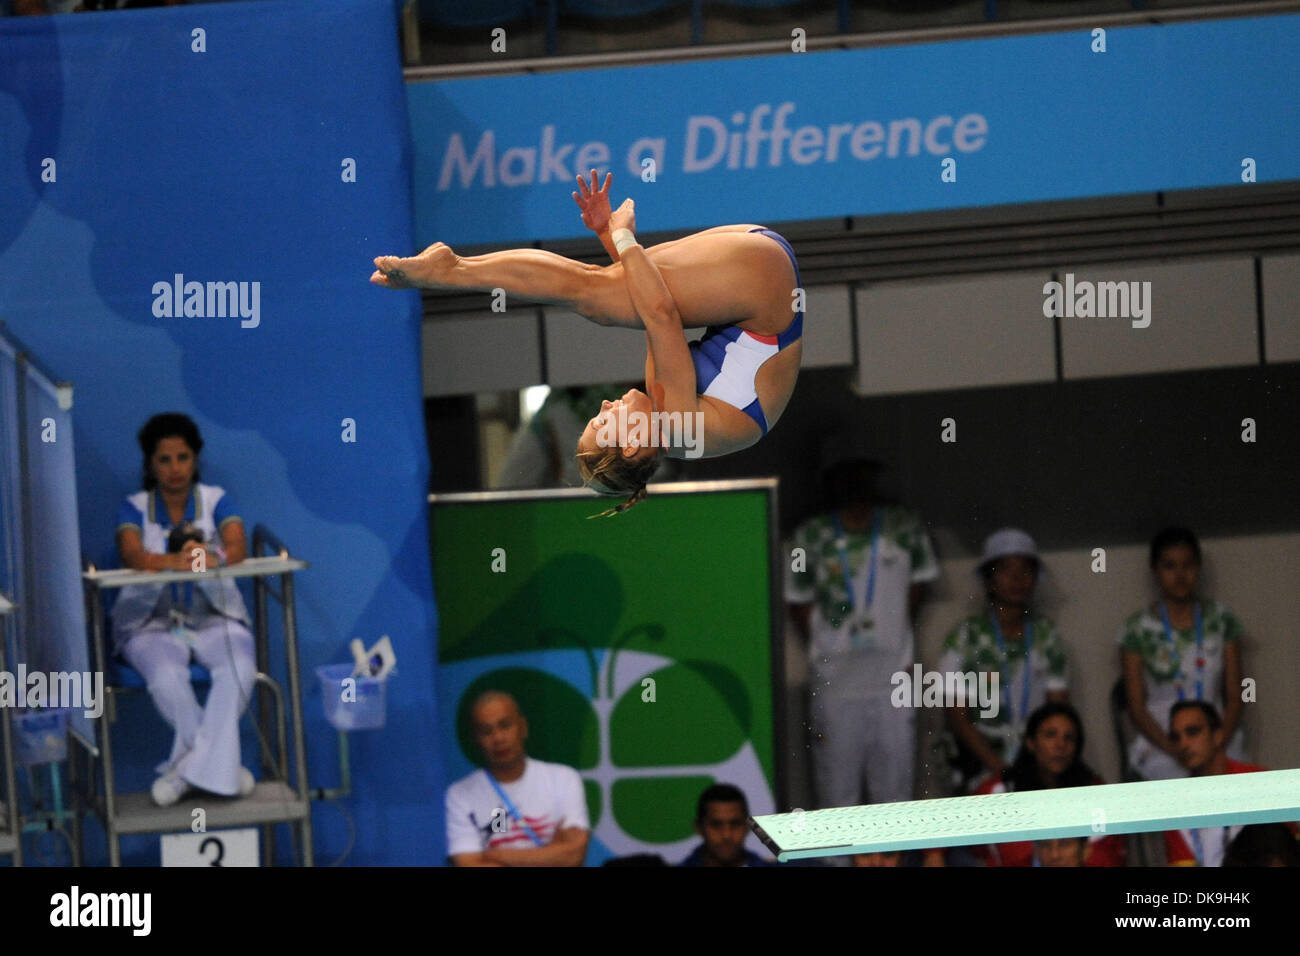 Aug. 21, 2011 - Shenzhen, China - KELCI BRYANT of the United States dives during the women's 3 meter springboard final at the 26th Summer Universiade (World University Games) in Shenzhen, China. (Credit Image: © Jeremy Breningstall/ZUMAPRESS.com) Stock Photo